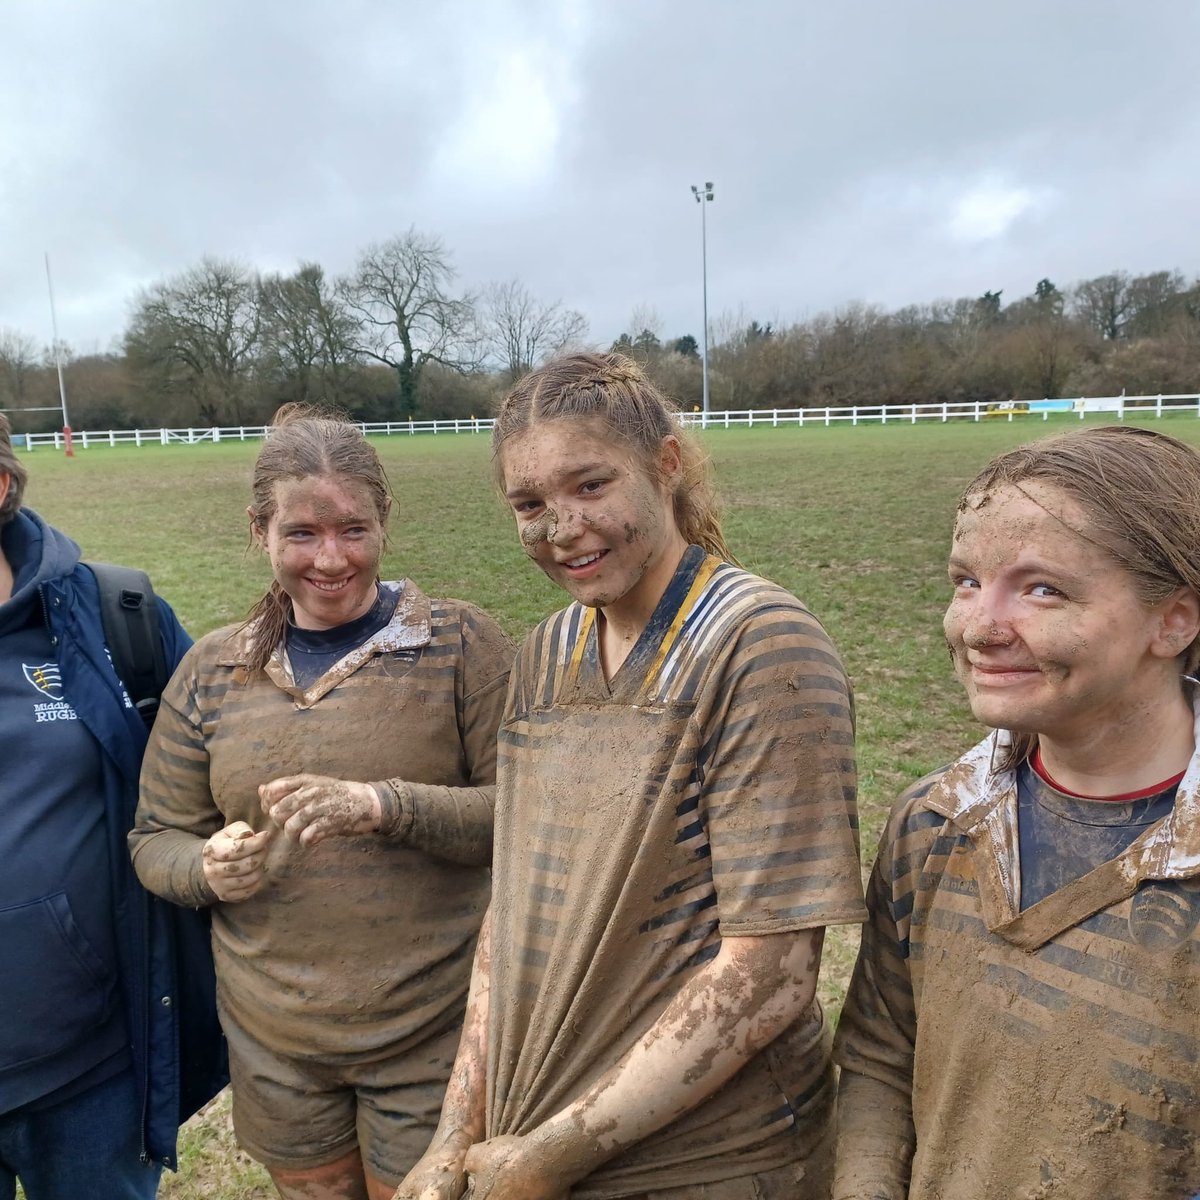 Thank you to Sussex Rugby for hosting the Middlesex ERDPP U16 girls at Crawley Rfc, testing conditions but smiles all round! #middlesexrugby #rfu #erdpp #girlsplayrugby